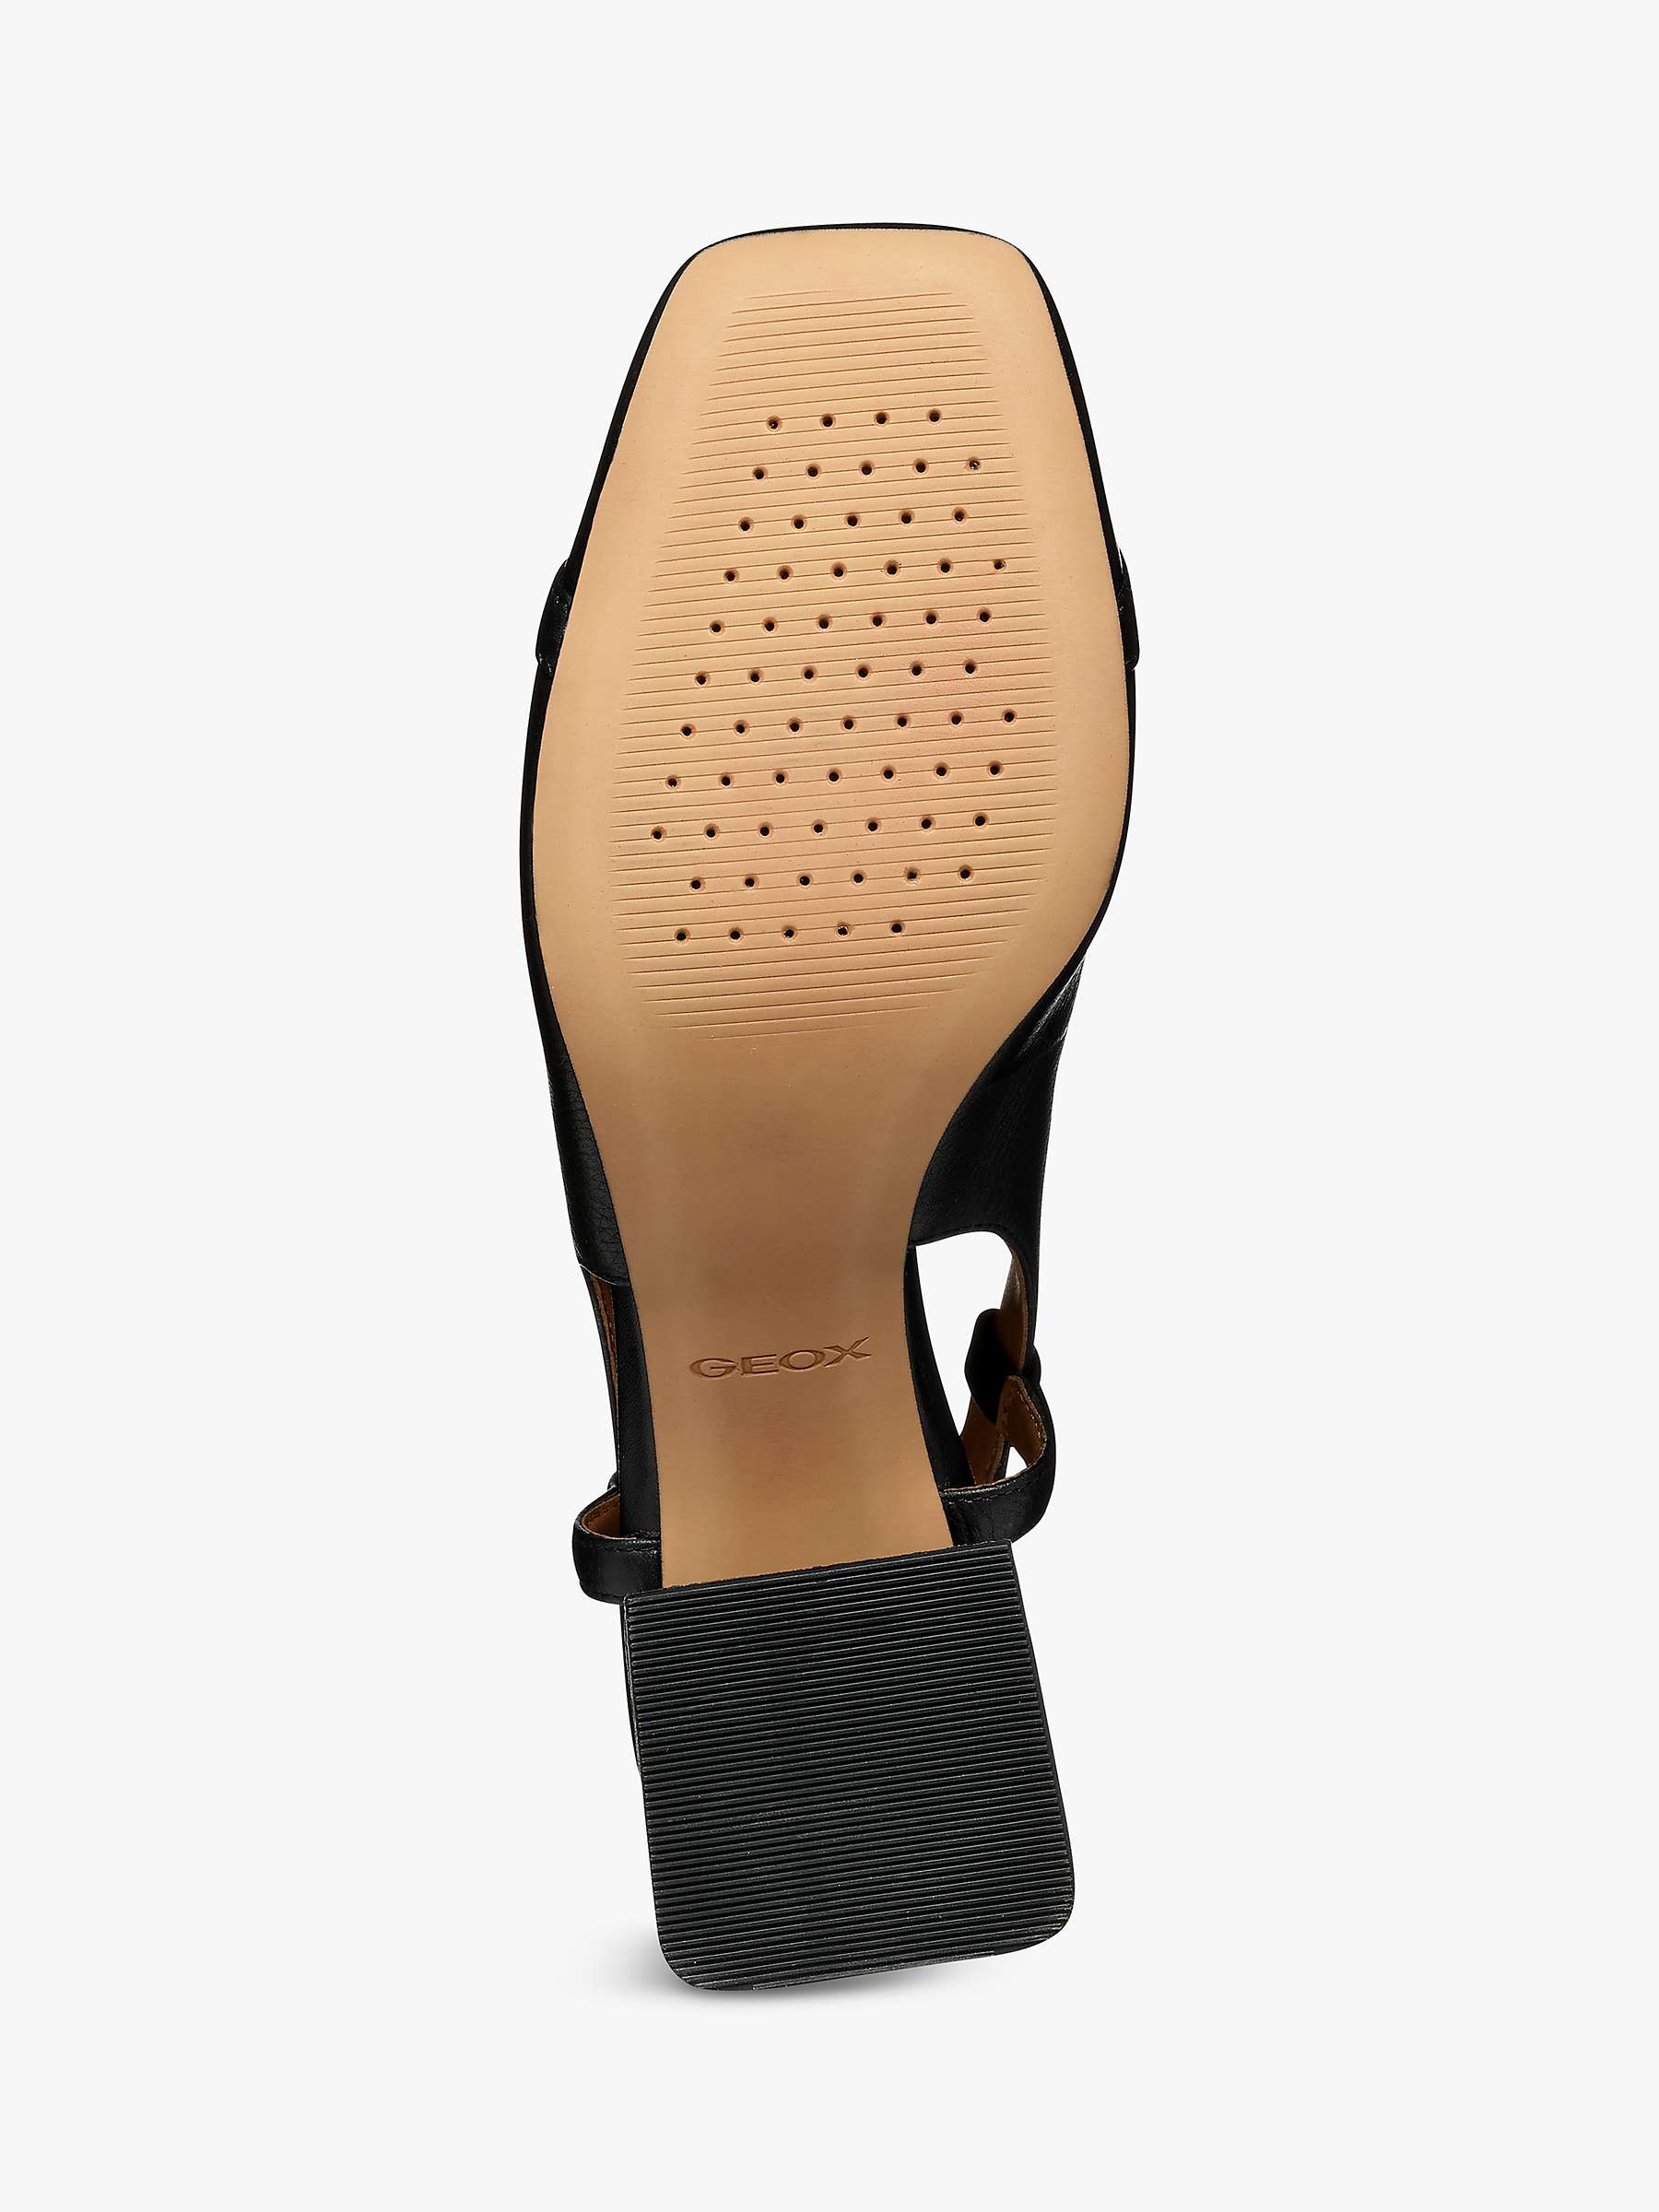 Buy Geox Coronilla Square Toe Leather Slingback Court Shoes Online at johnlewis.com